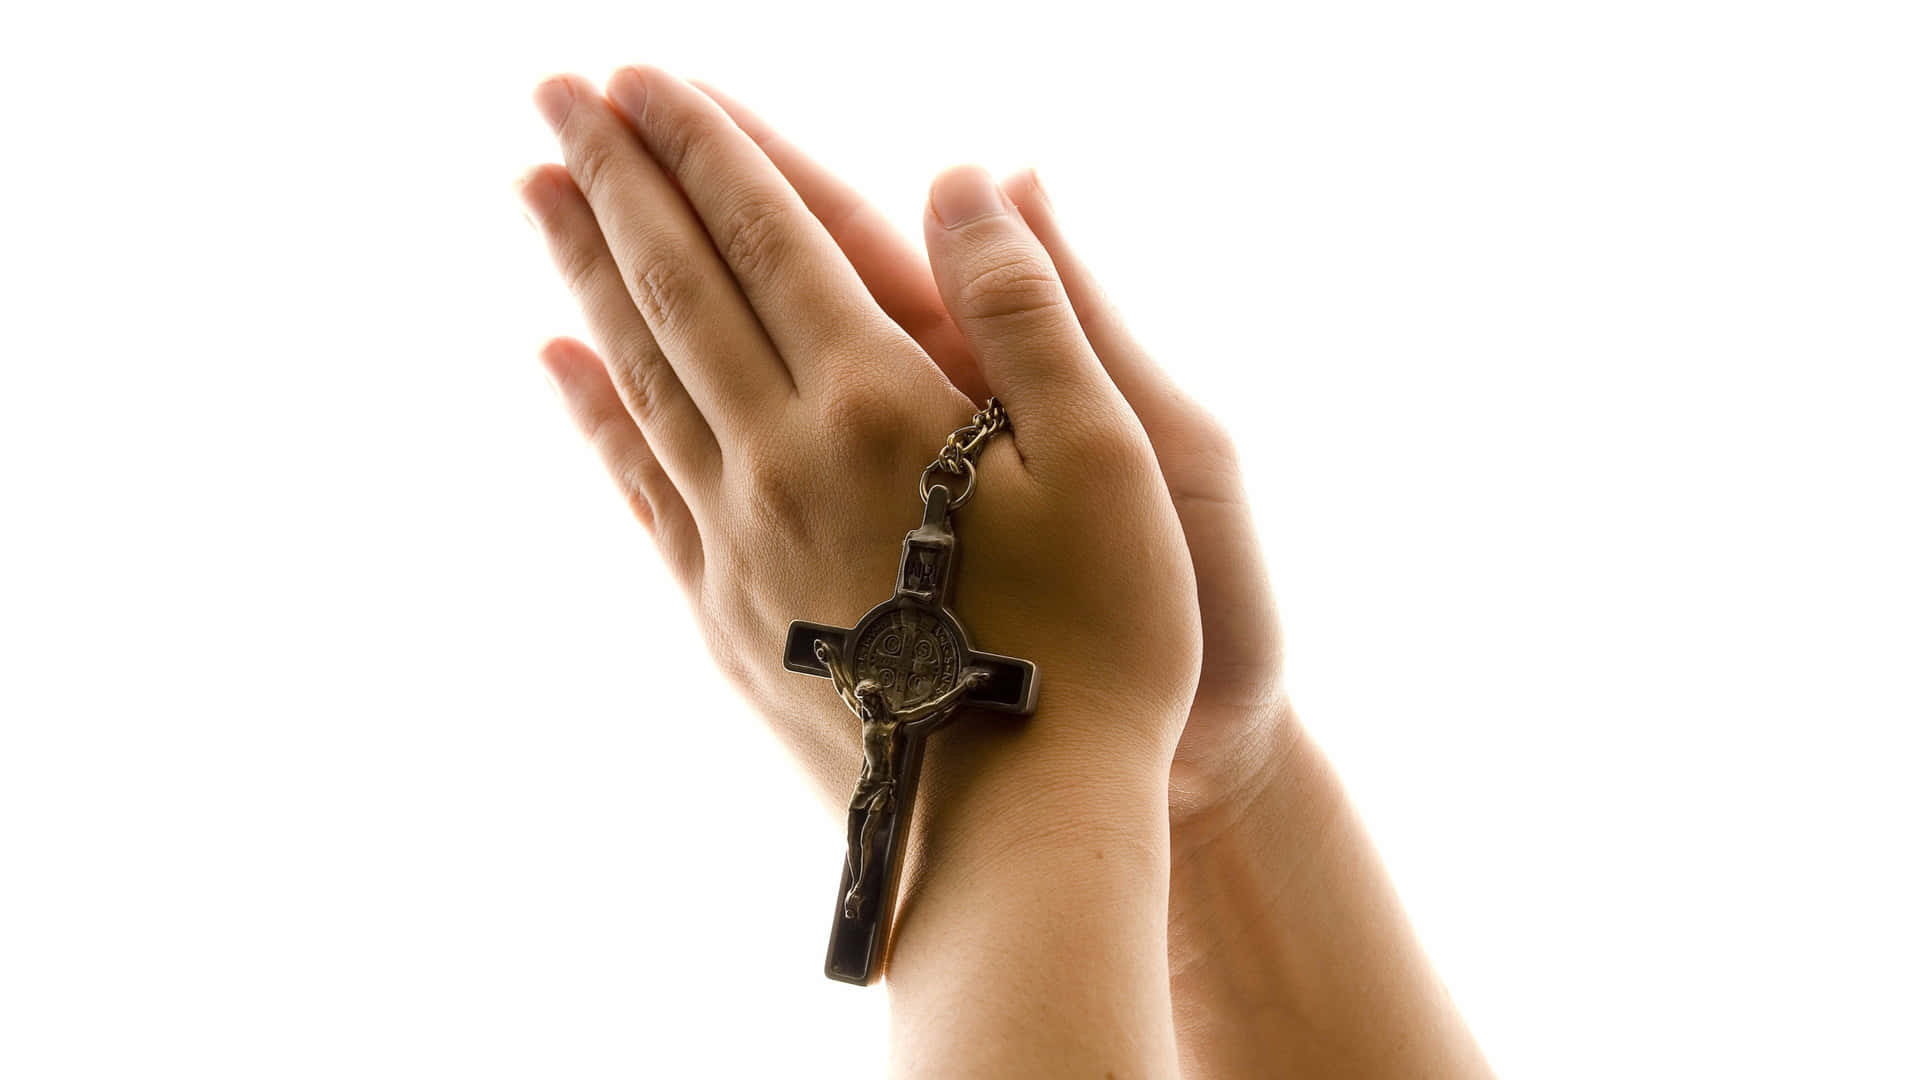 Praying Hands With Rosary Picture